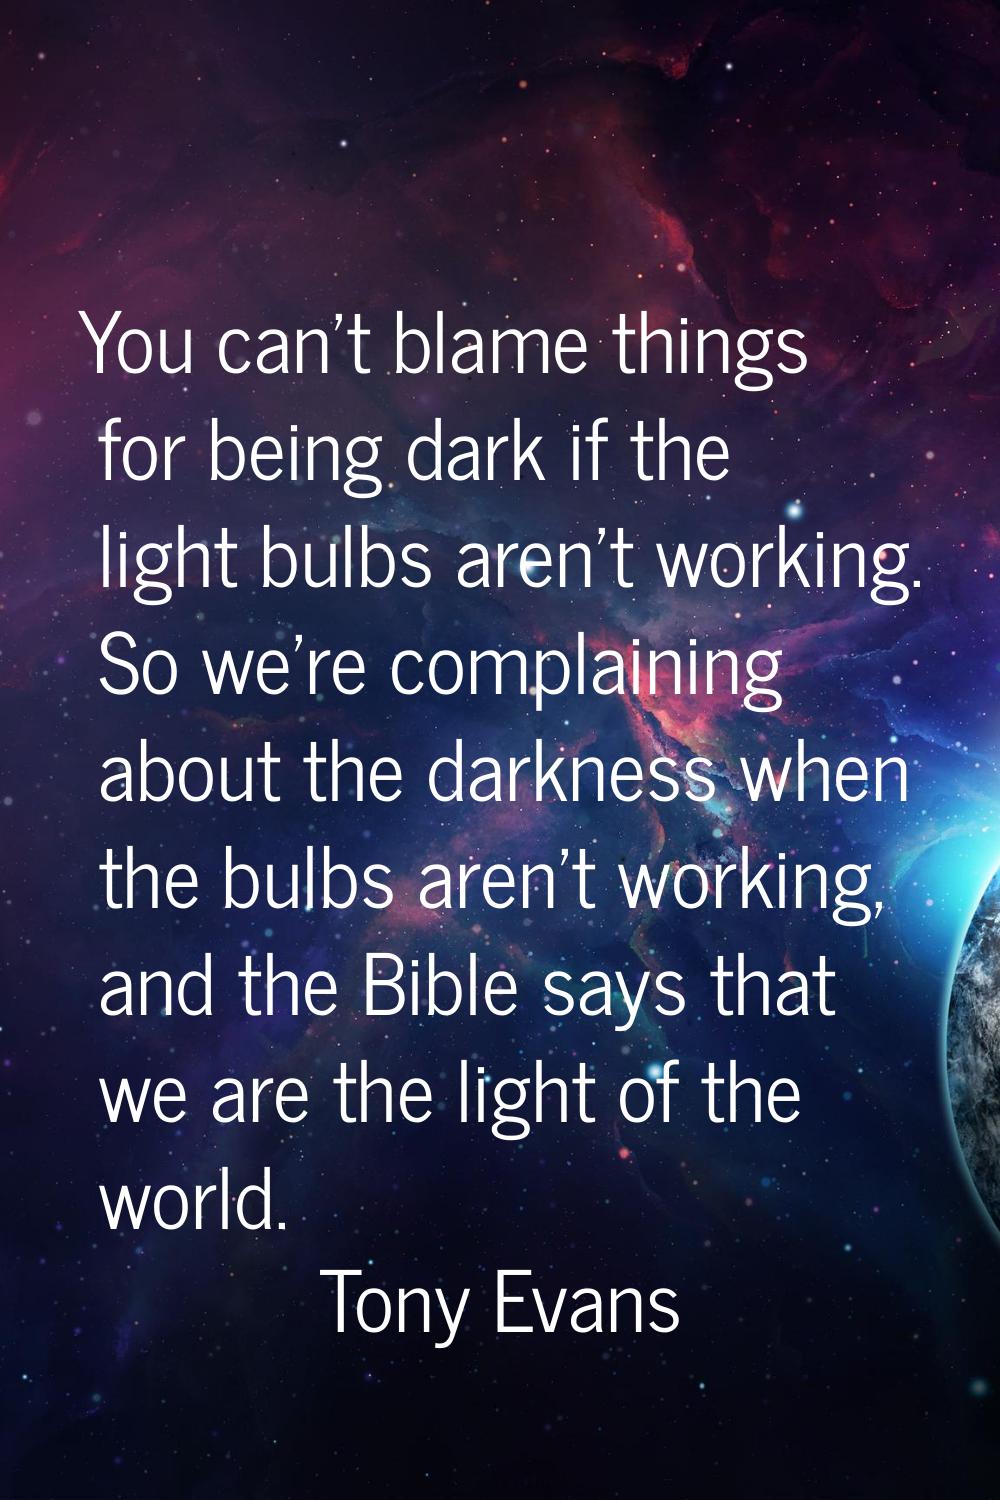 You can't blame things for being dark if the light bulbs aren't working. So we're complaining about